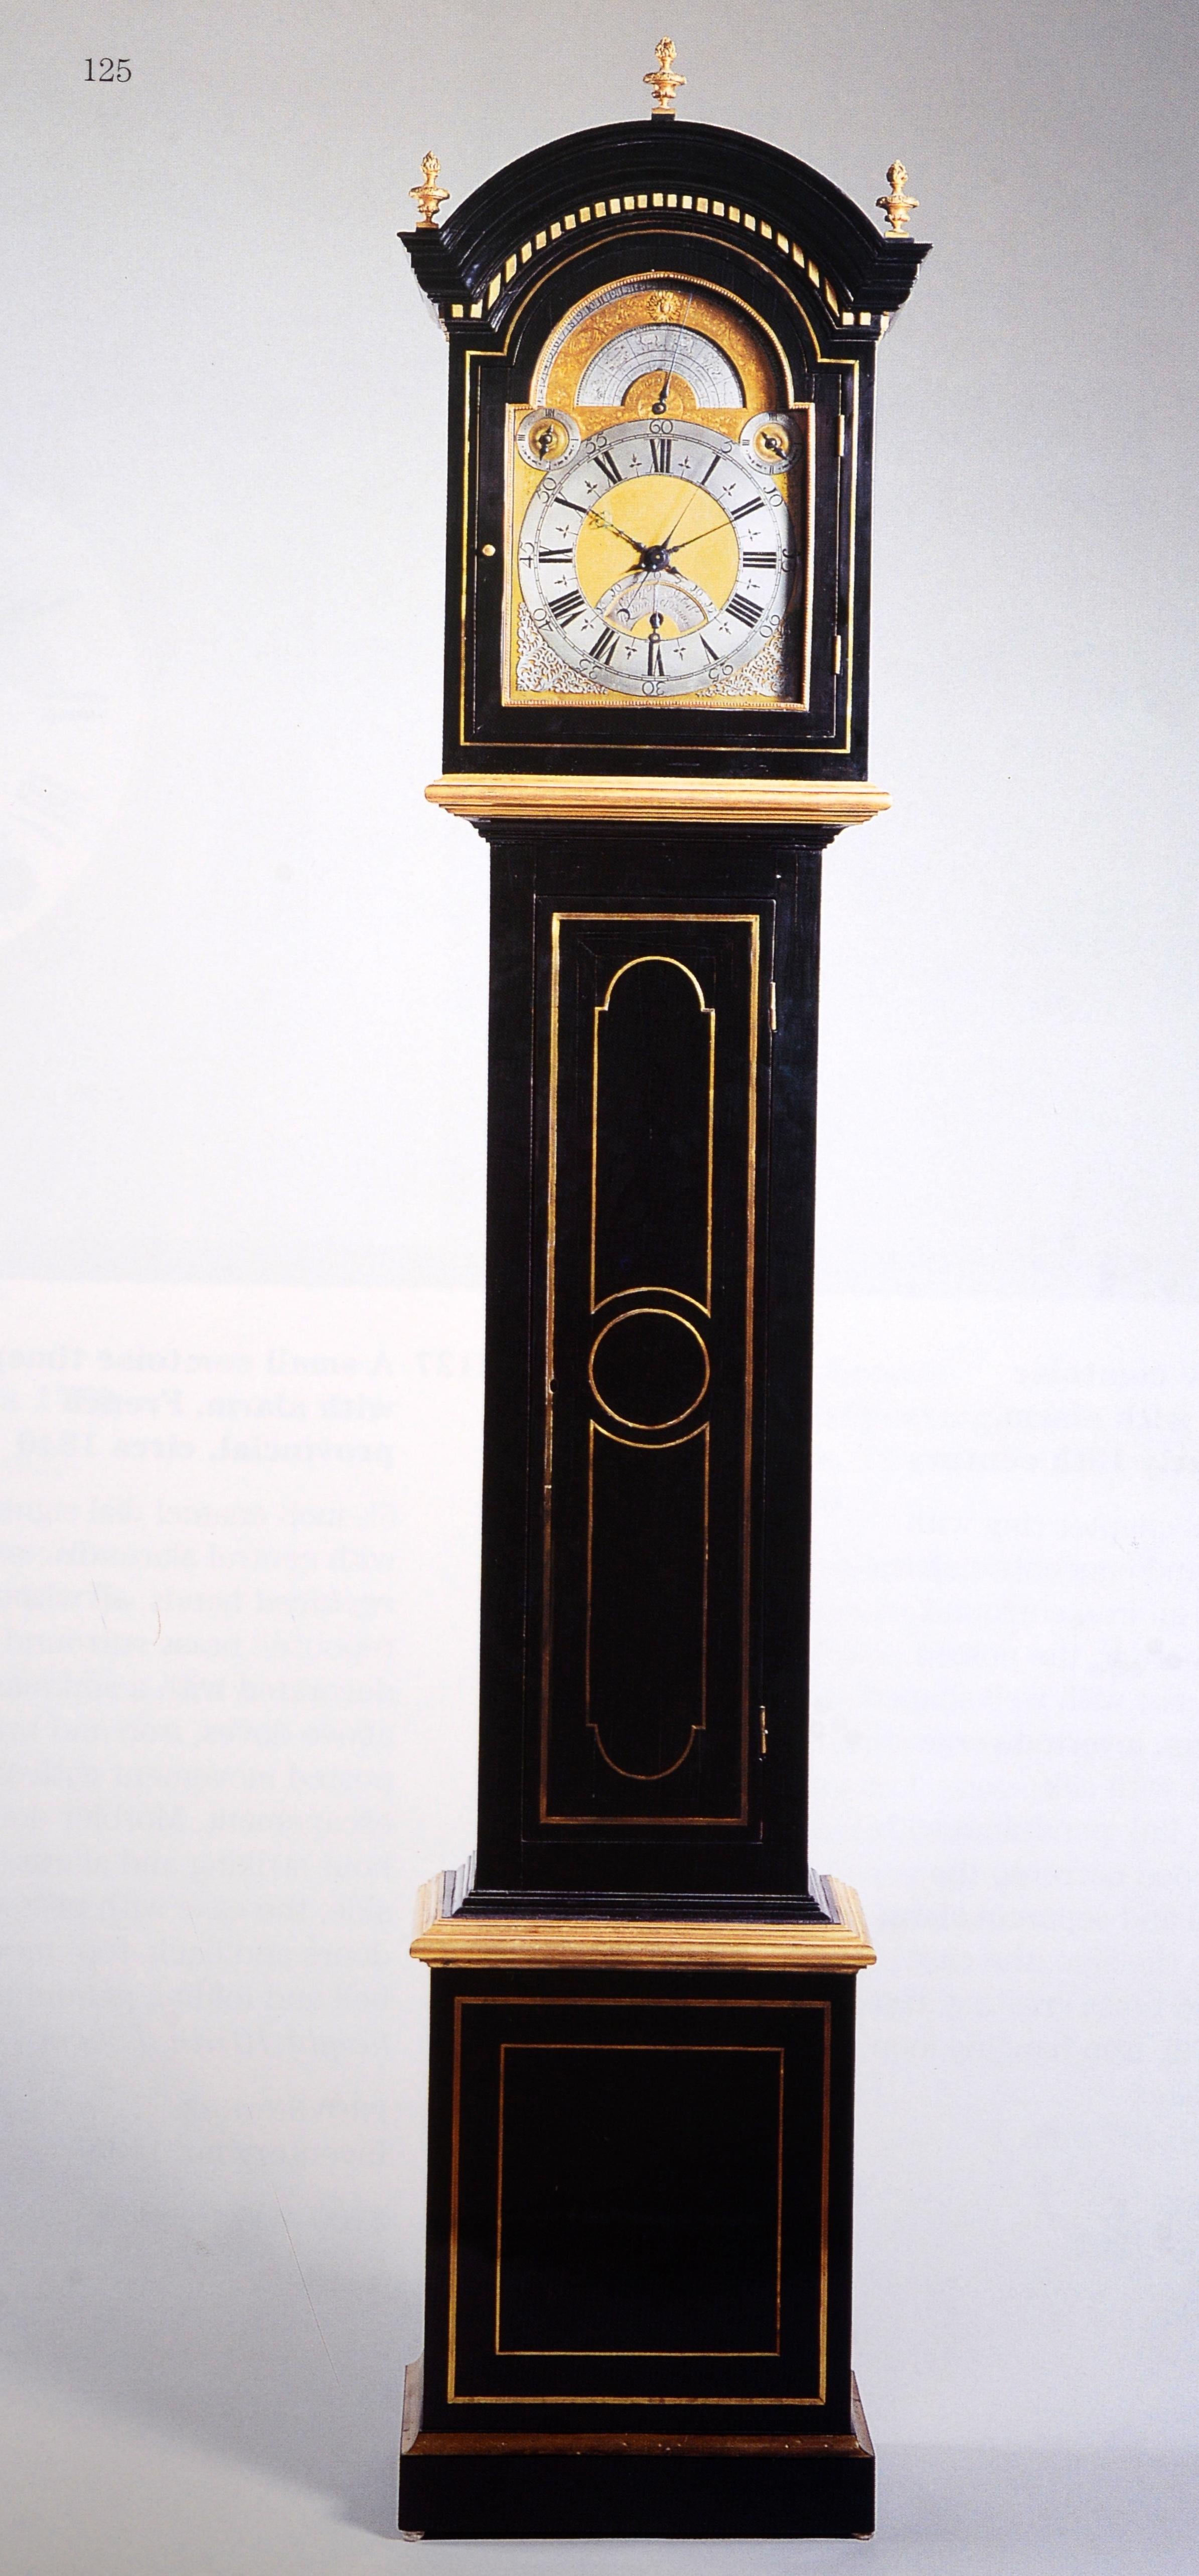 Paper Justice Warren Shepro Collection of Clocks: Sotheby's NY, April 26, 2001, 1st Ed For Sale